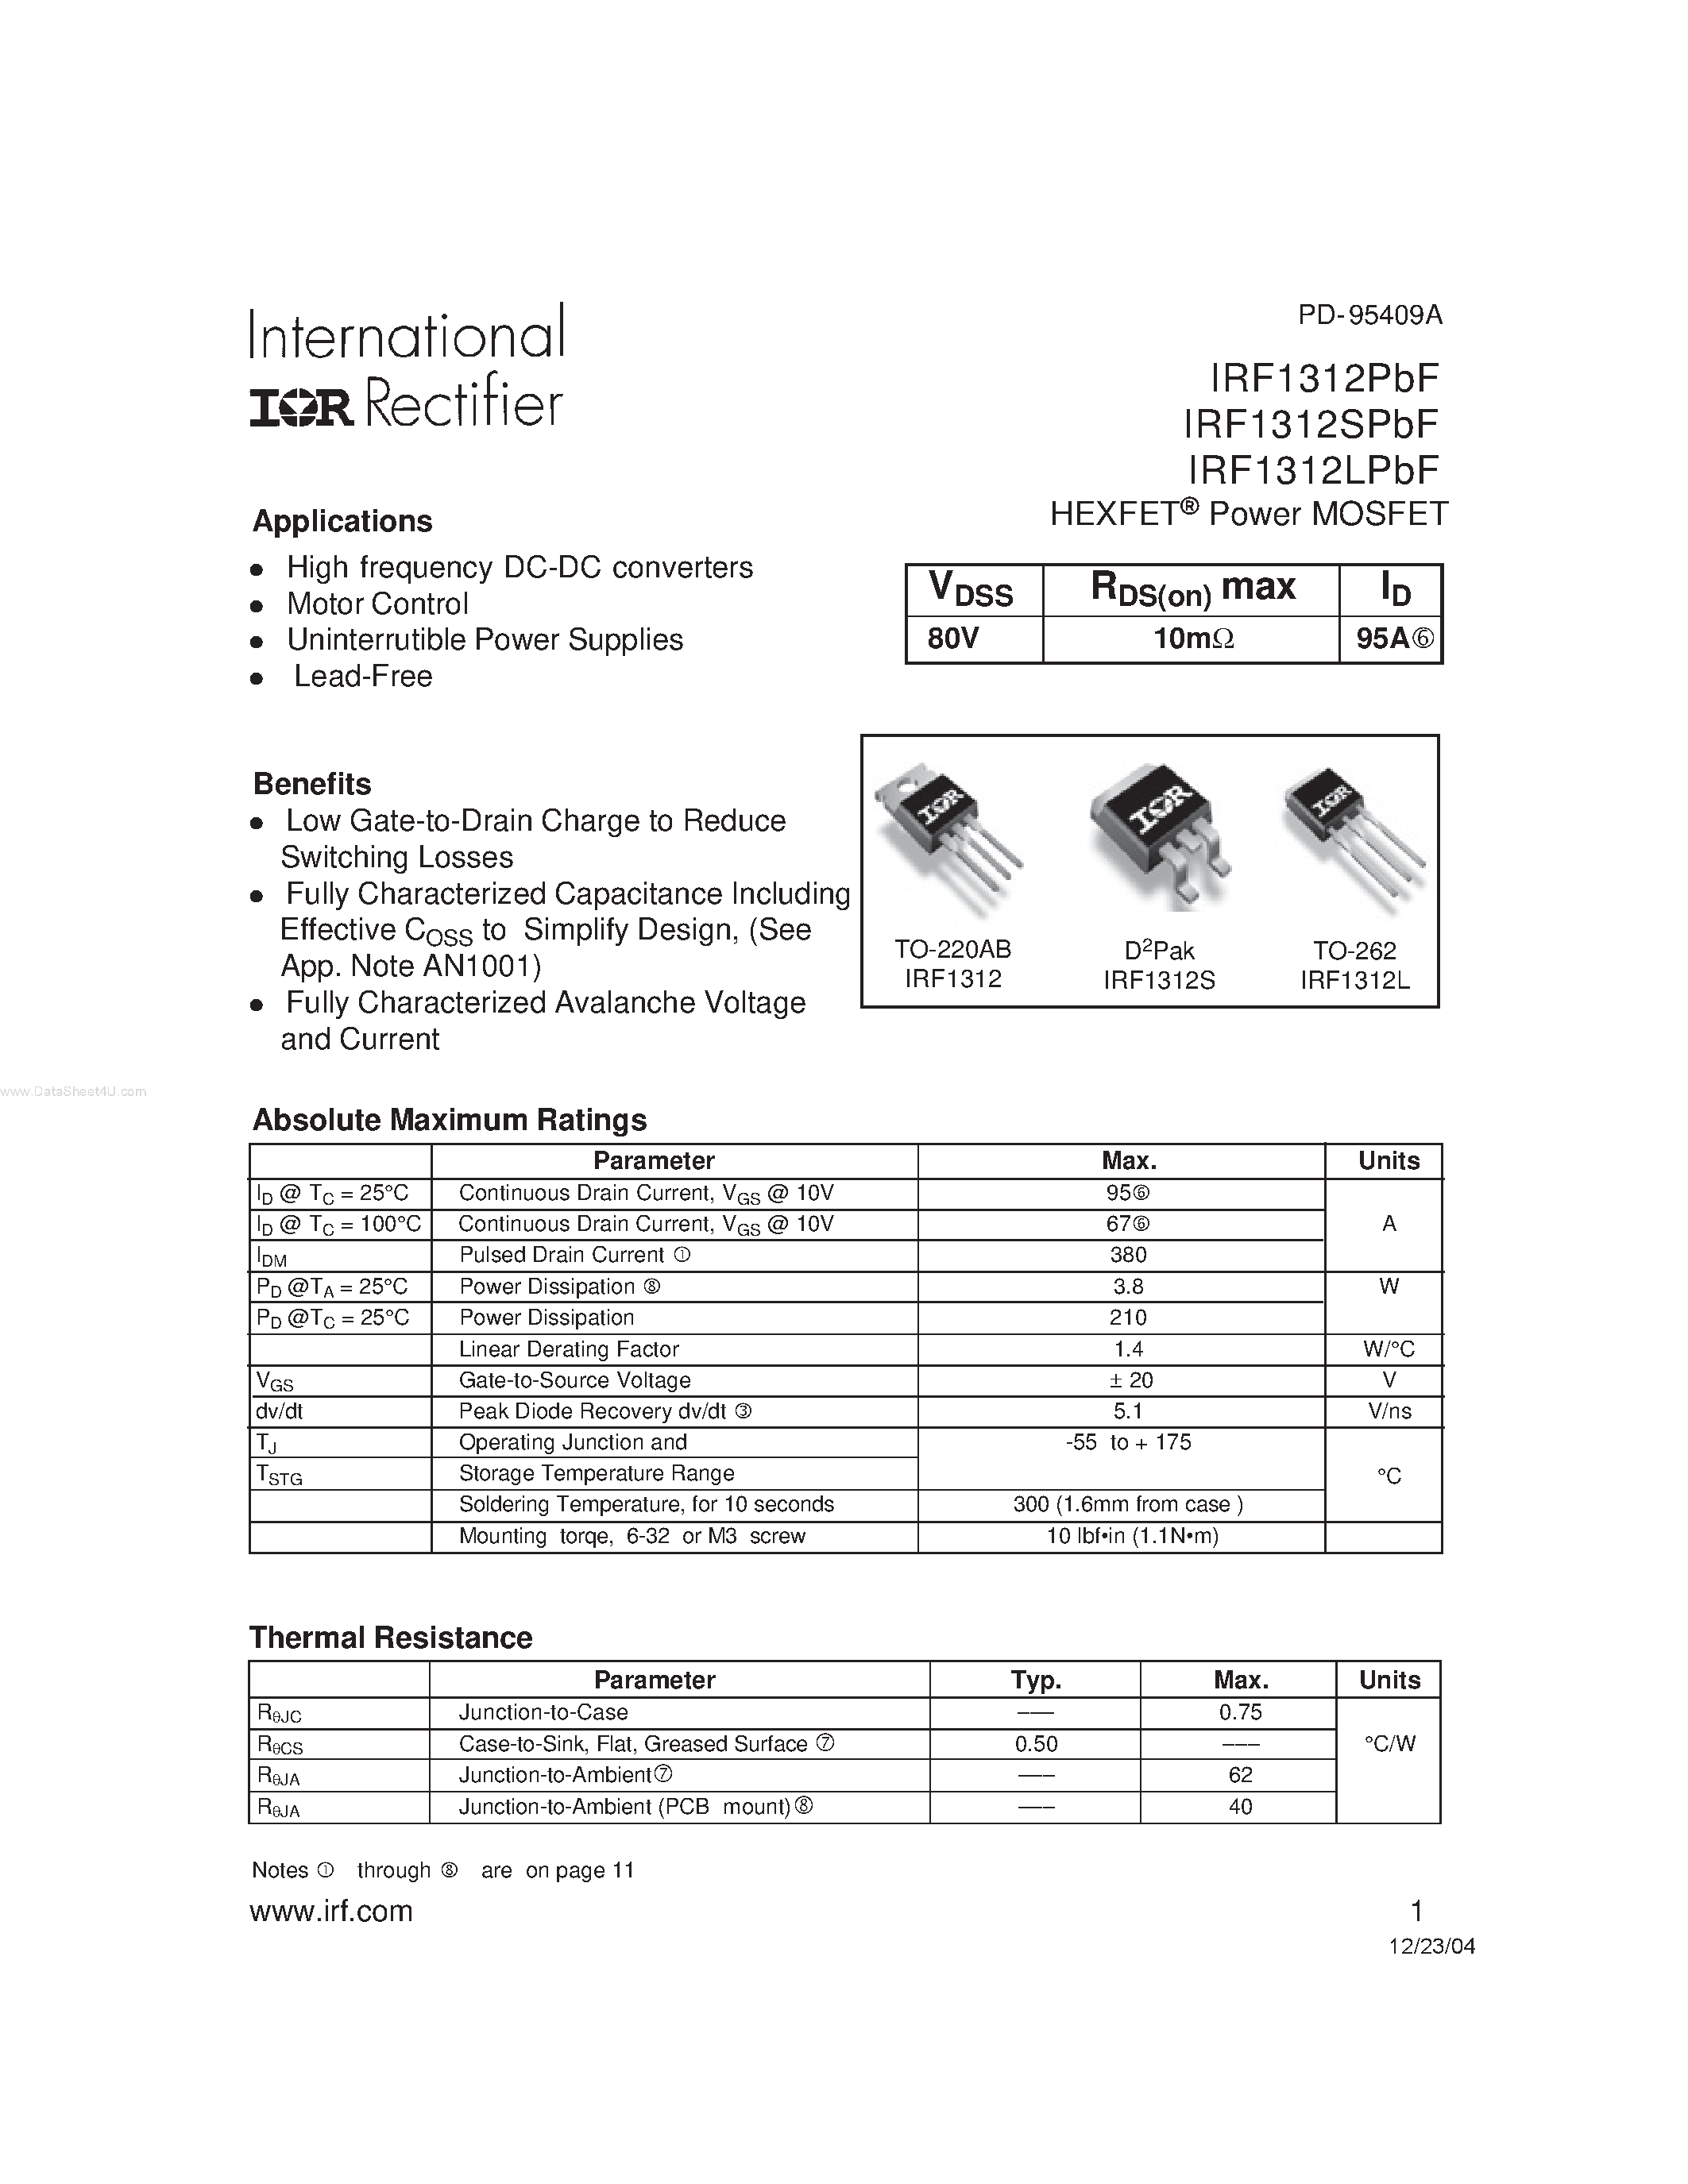 Даташит IRF1312LPbF - (IRF1312xPbF) HEXFET Power MOSFET страница 1